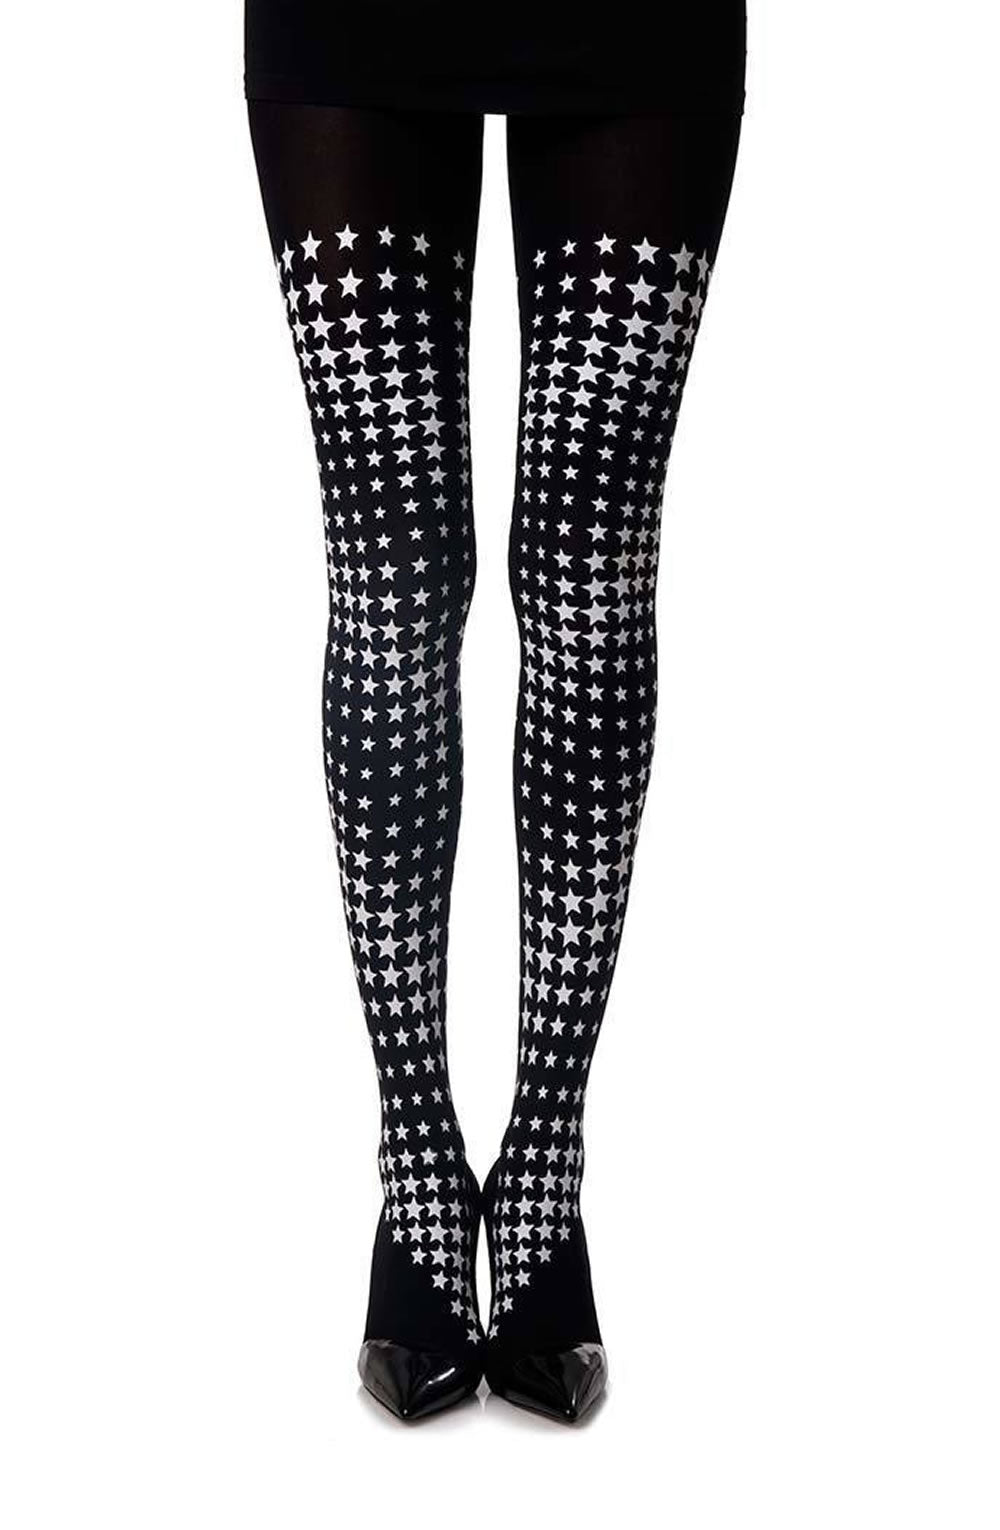 Zohara "Diaonds in the Sky" Print Tights  Hosiery, NEWLY-IMPORTED, Tights, Zohara - So Luxe Lingerie